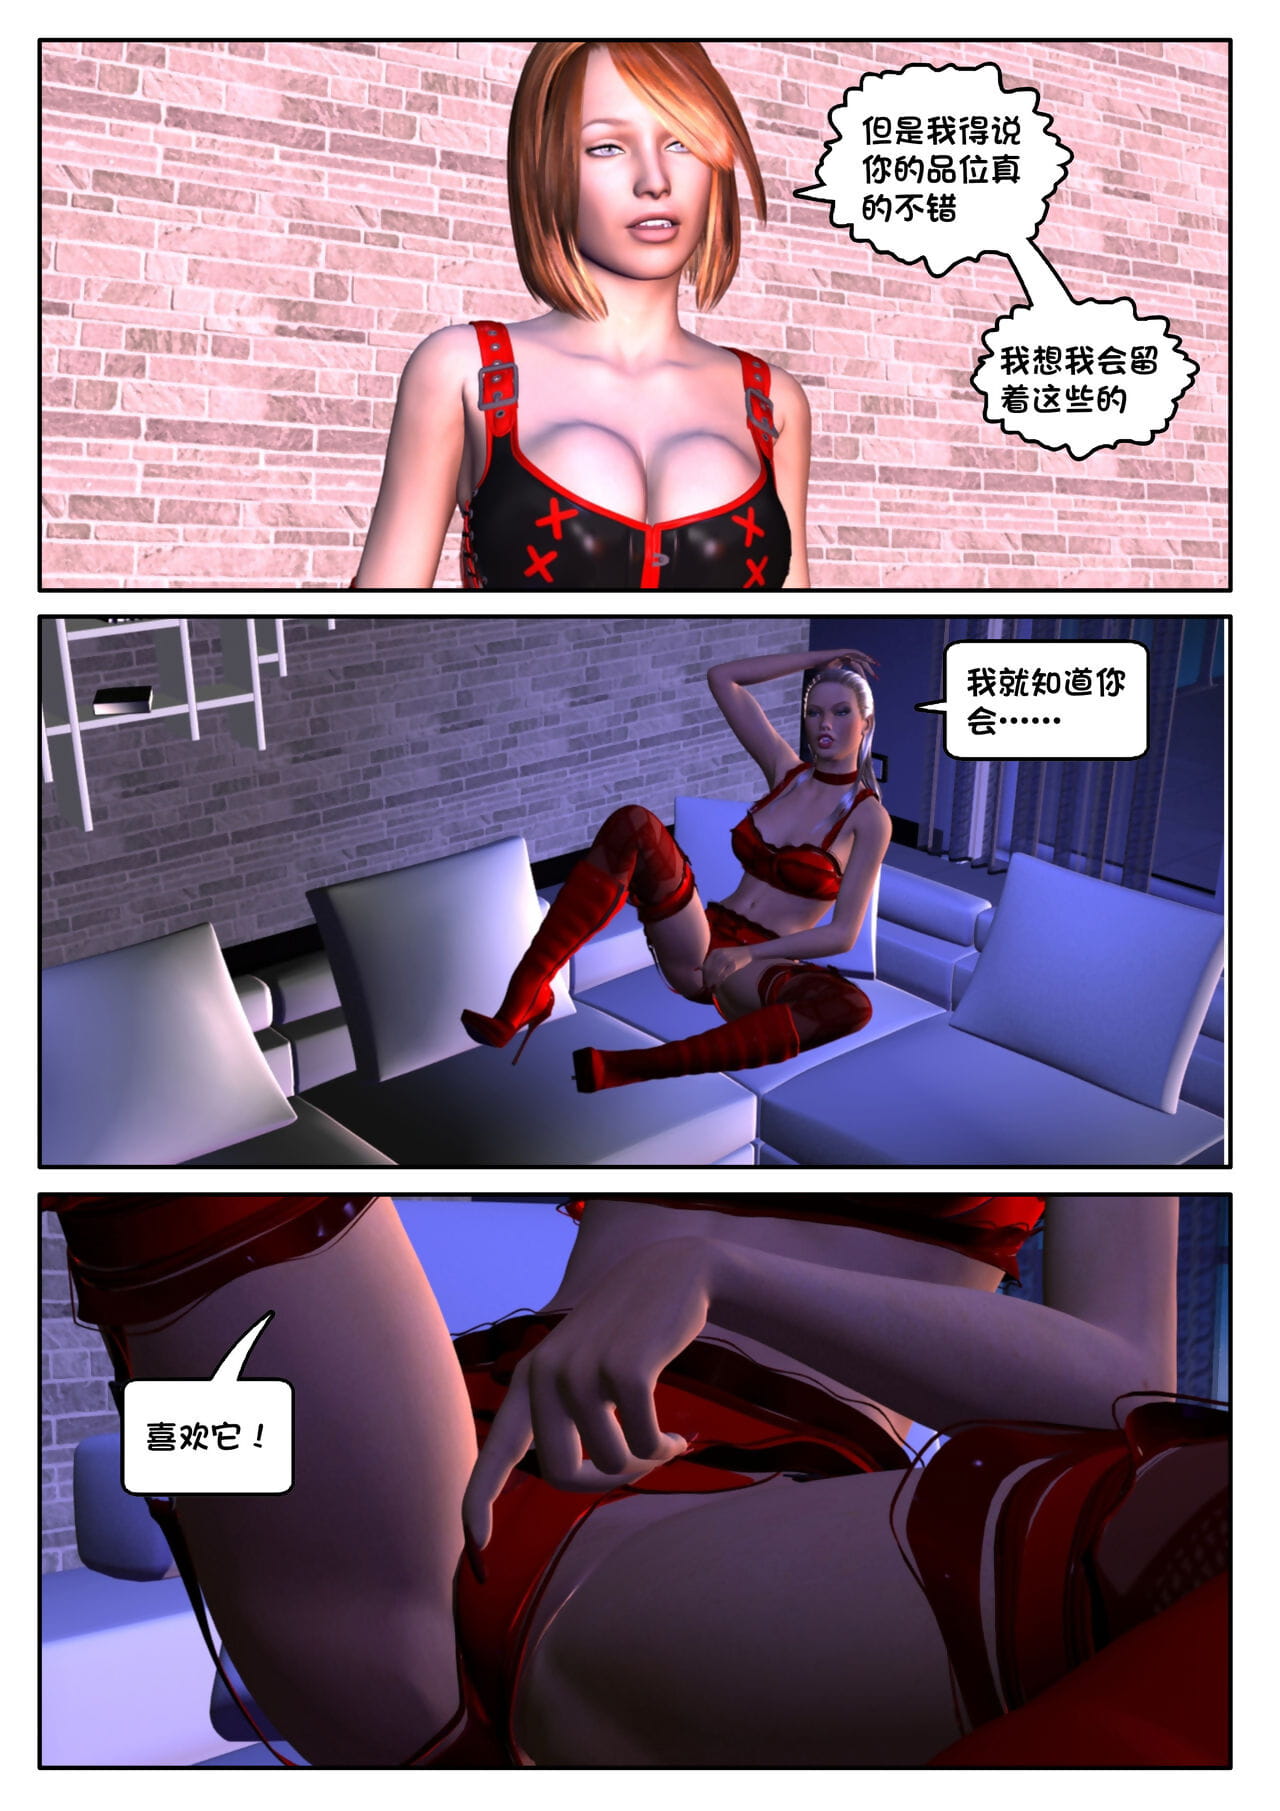 Shinra-kun Make an issue of Squandered Eminence Ch. 4: Sabbath Chinese 这很恶堕X混沌心海汉化组 - accouterment 5